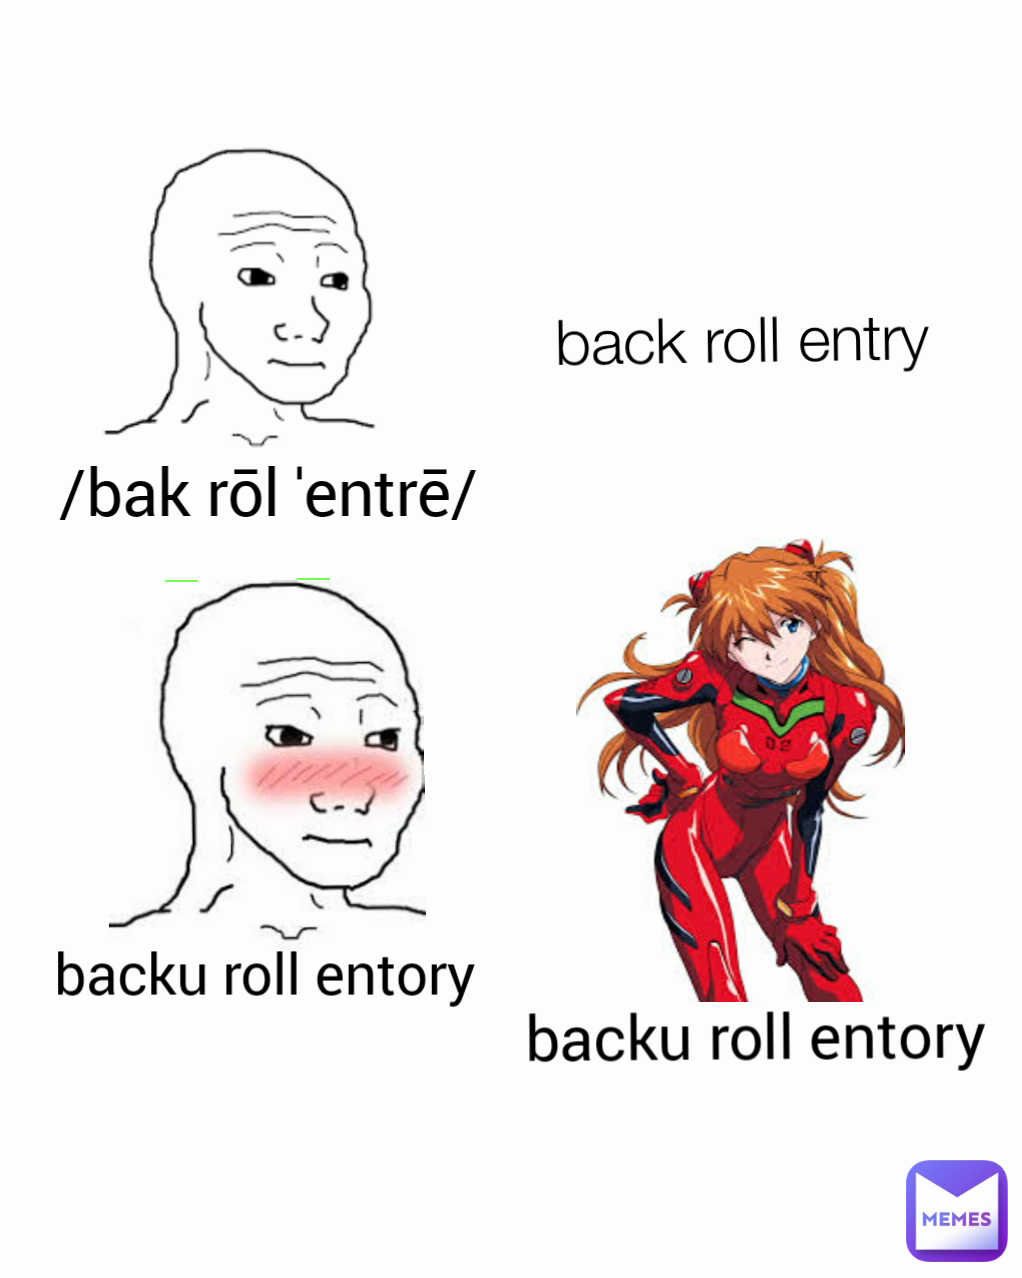 backu roll entory backu roll entory /bak rōl ˈentrē/ back roll entry